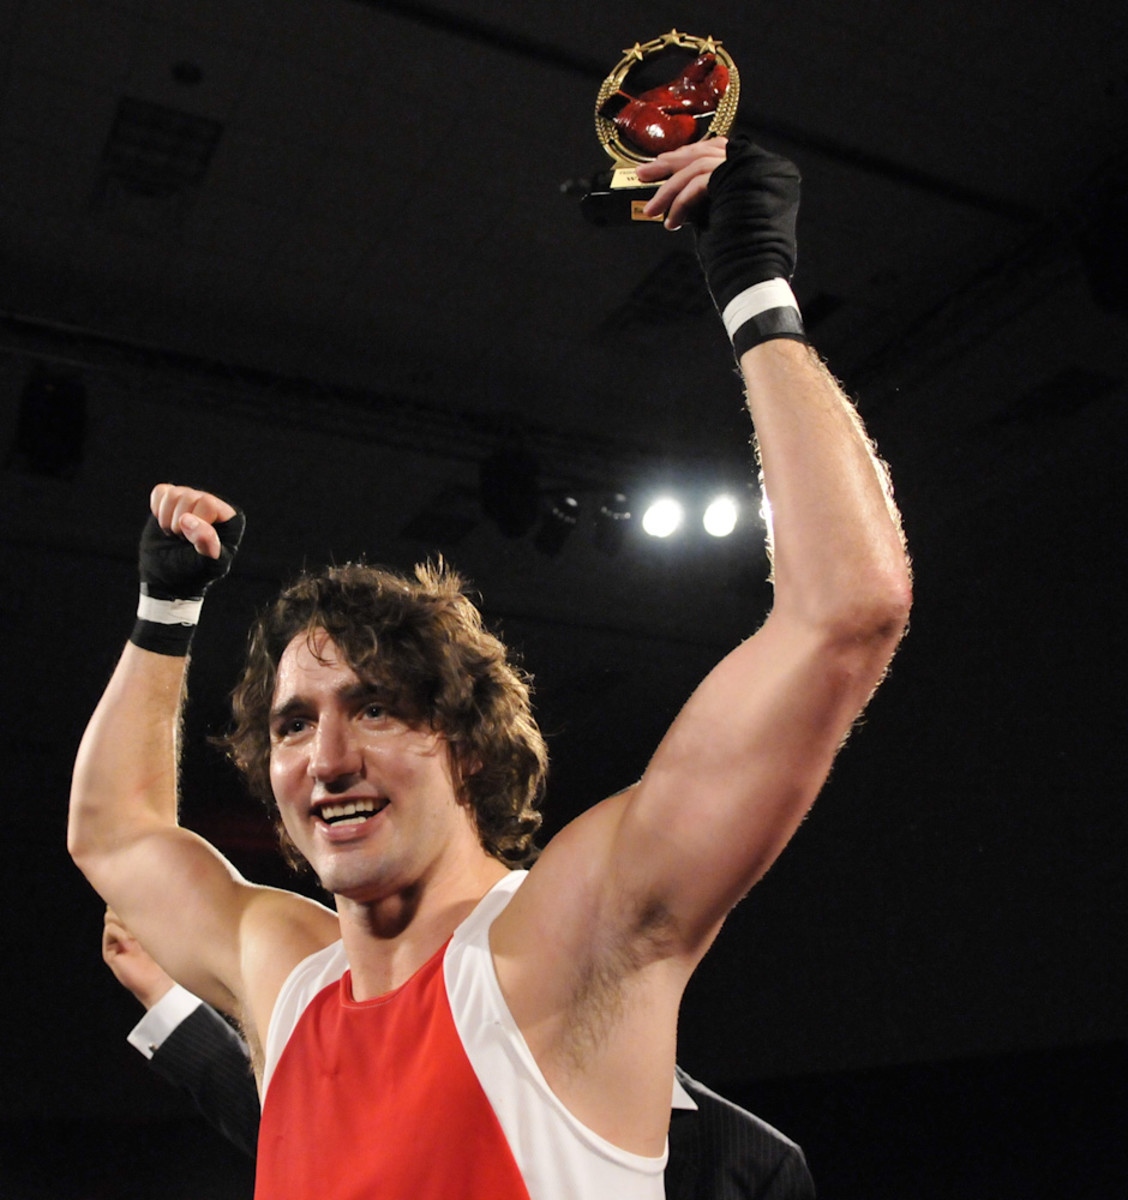 Liberal MP Justin Trudeau celebrates after he defeated Conservative Senator Patrick Brazeau during charity boxing match for cancer research in Ottawa (Mar 31, 2012).